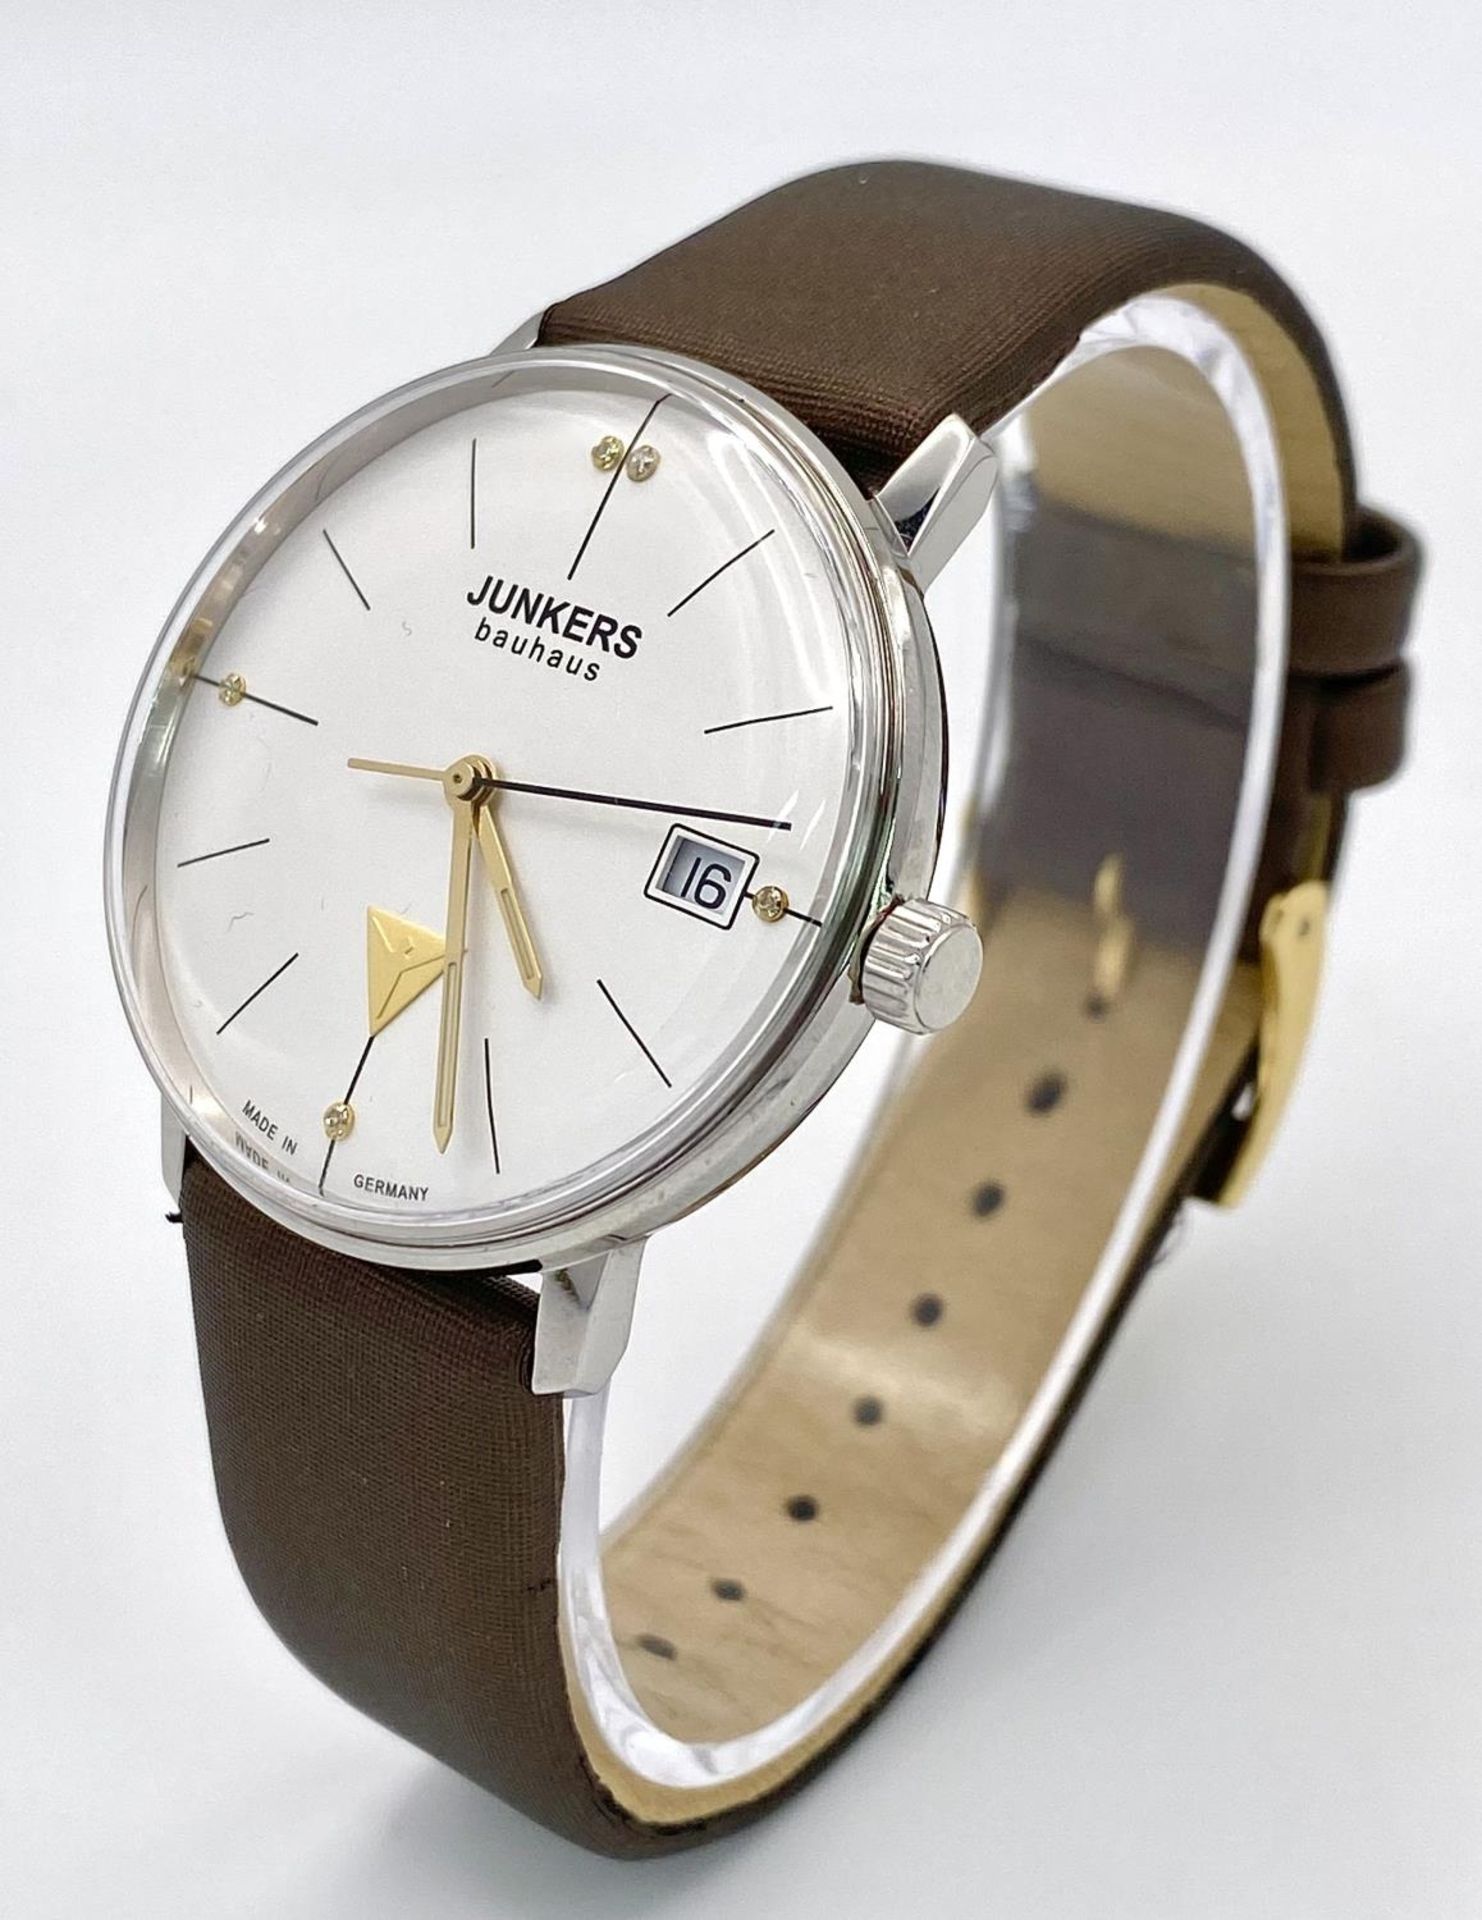 A Junkers Stylish Bauhaus Gents Quartz Watch. Brown leather strap. Stainless steel case - 35mm. - Image 2 of 8